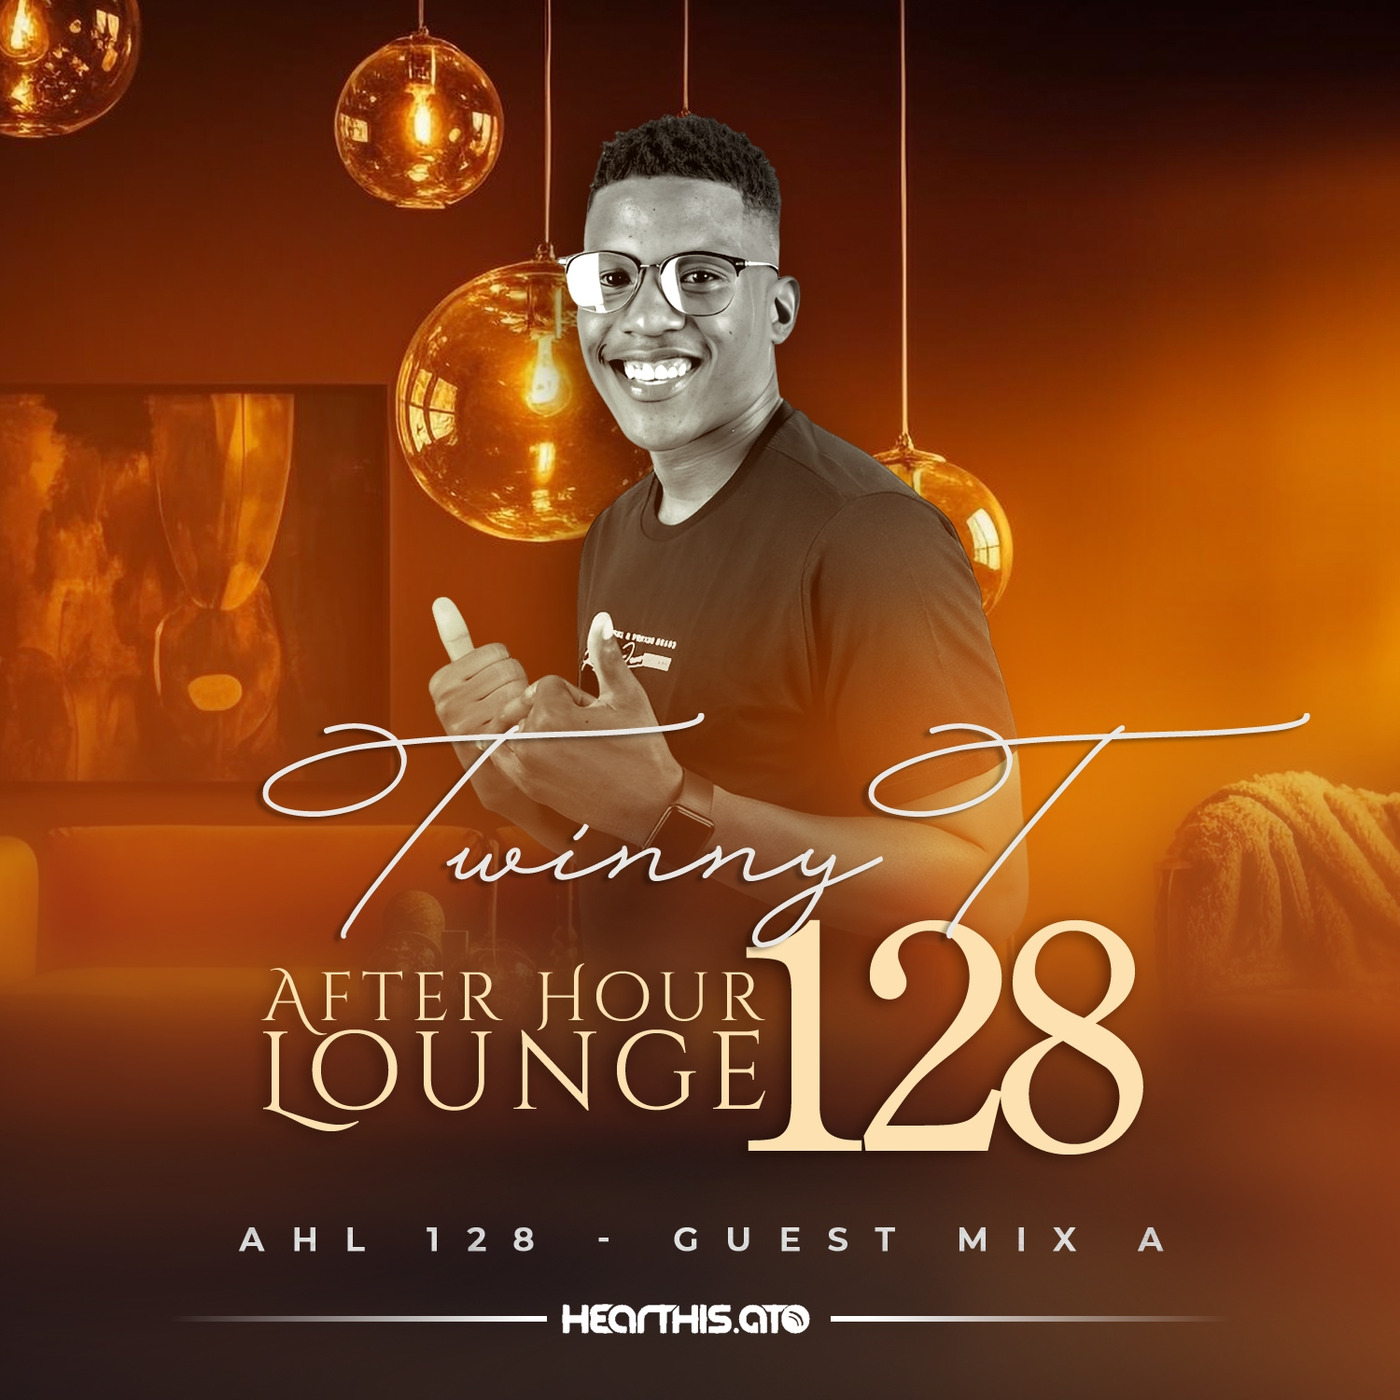 After Hour Lounge 128 (Guest Mix - A) mixed by Twinny T